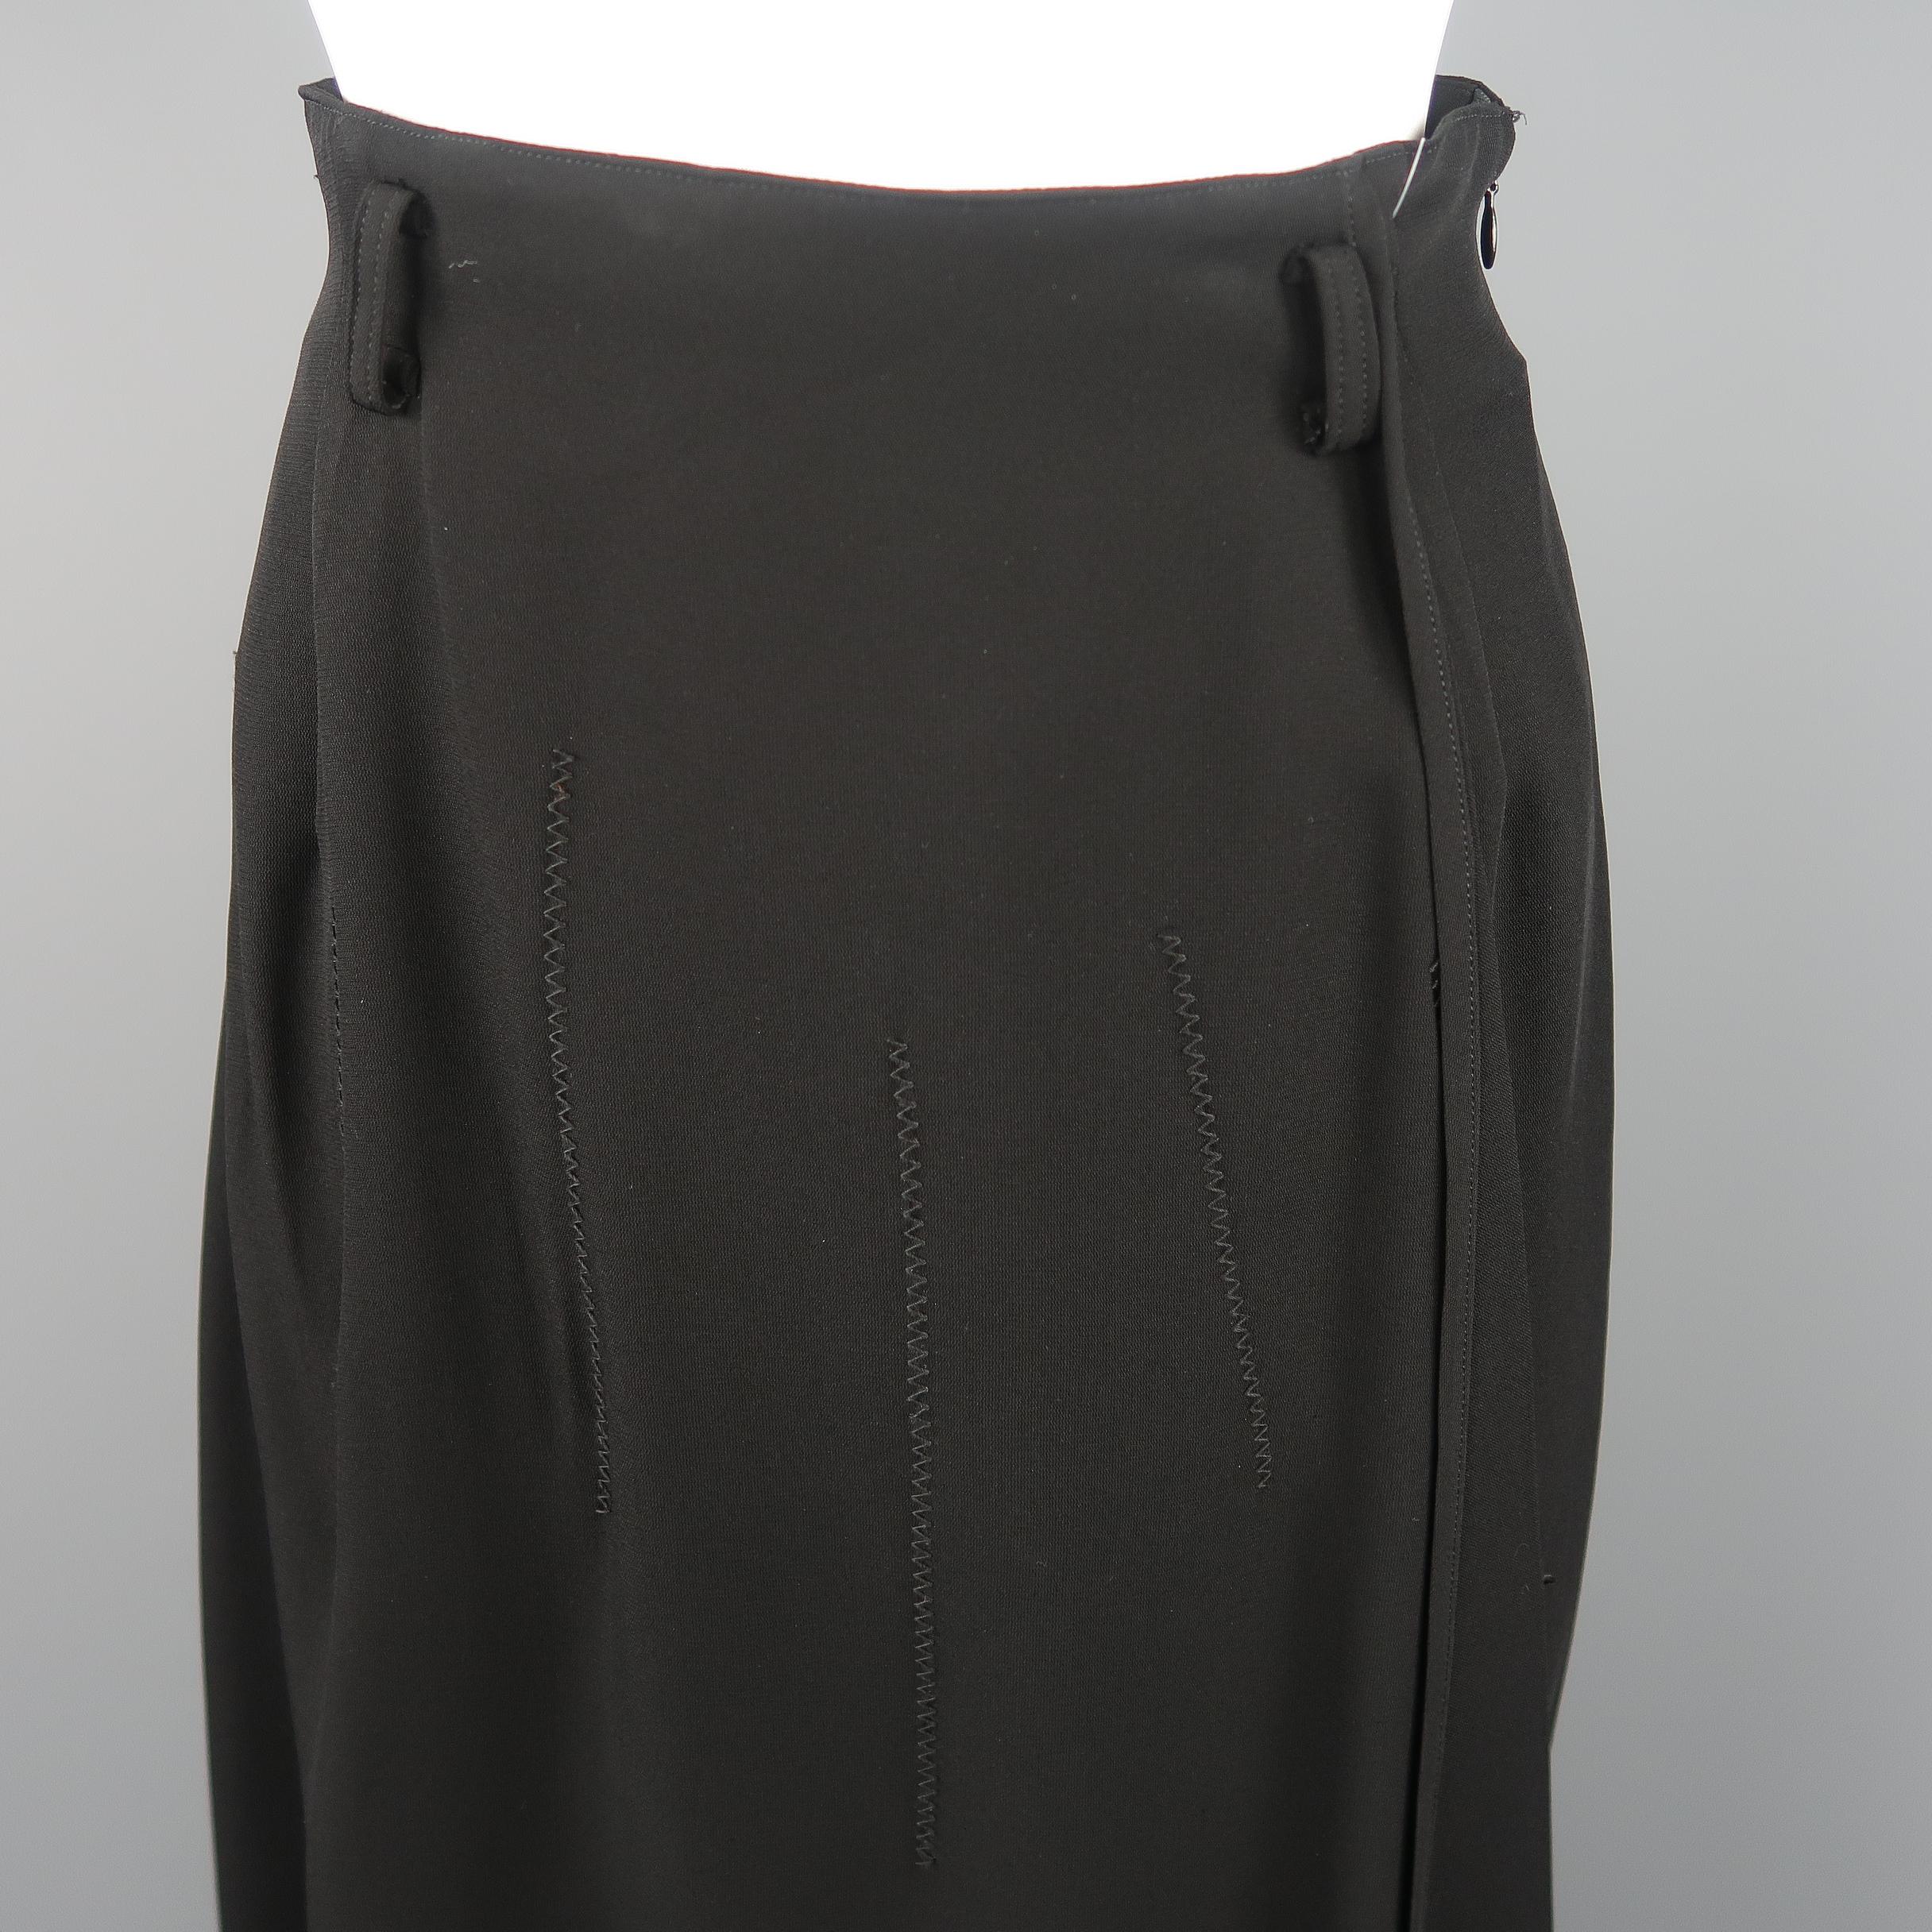 Matsuda skirt, in triacetate blend in black tone, with embroideries in black, high side slit, hidden lateral zipper, asymmetrical hem and lined  interior. Made in Japan.
 
Good  Pre-Owned Condition.
Marked: IT 38
 
Measurements:
 
Waist: 25 in.
Hip: